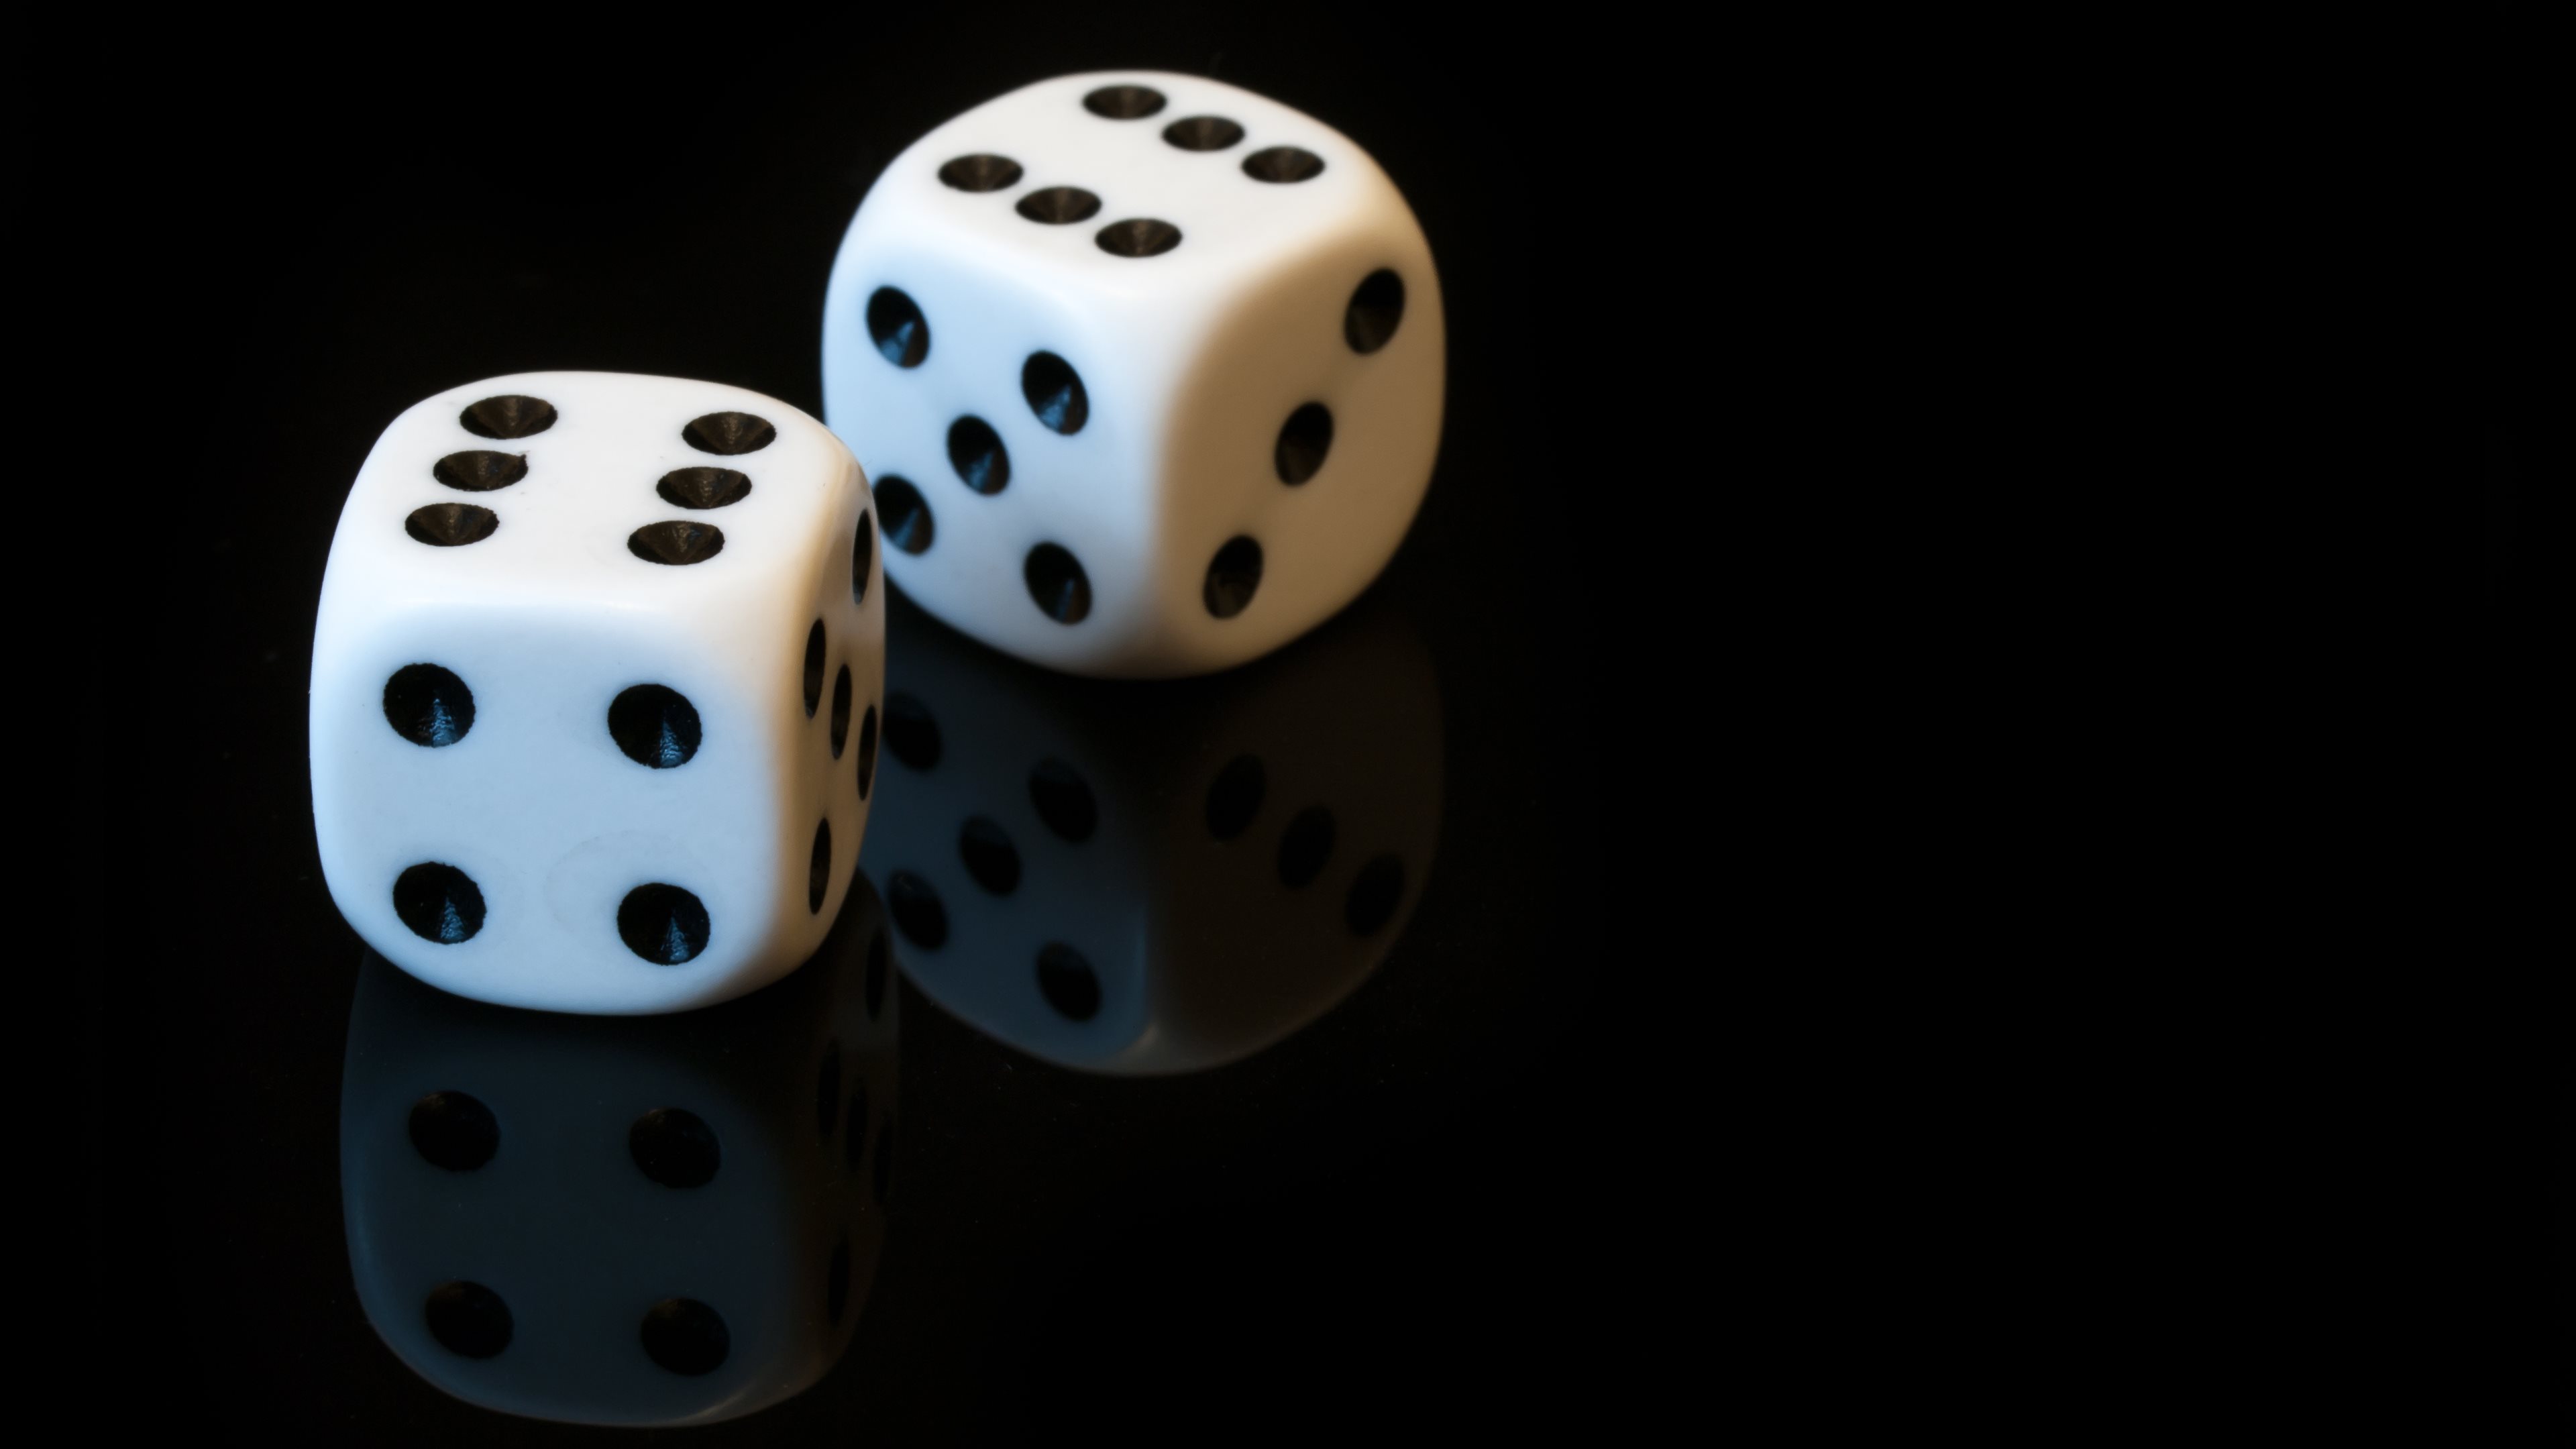 dice wallpaper,dice game,games,indoor games and sports,dice,recreation